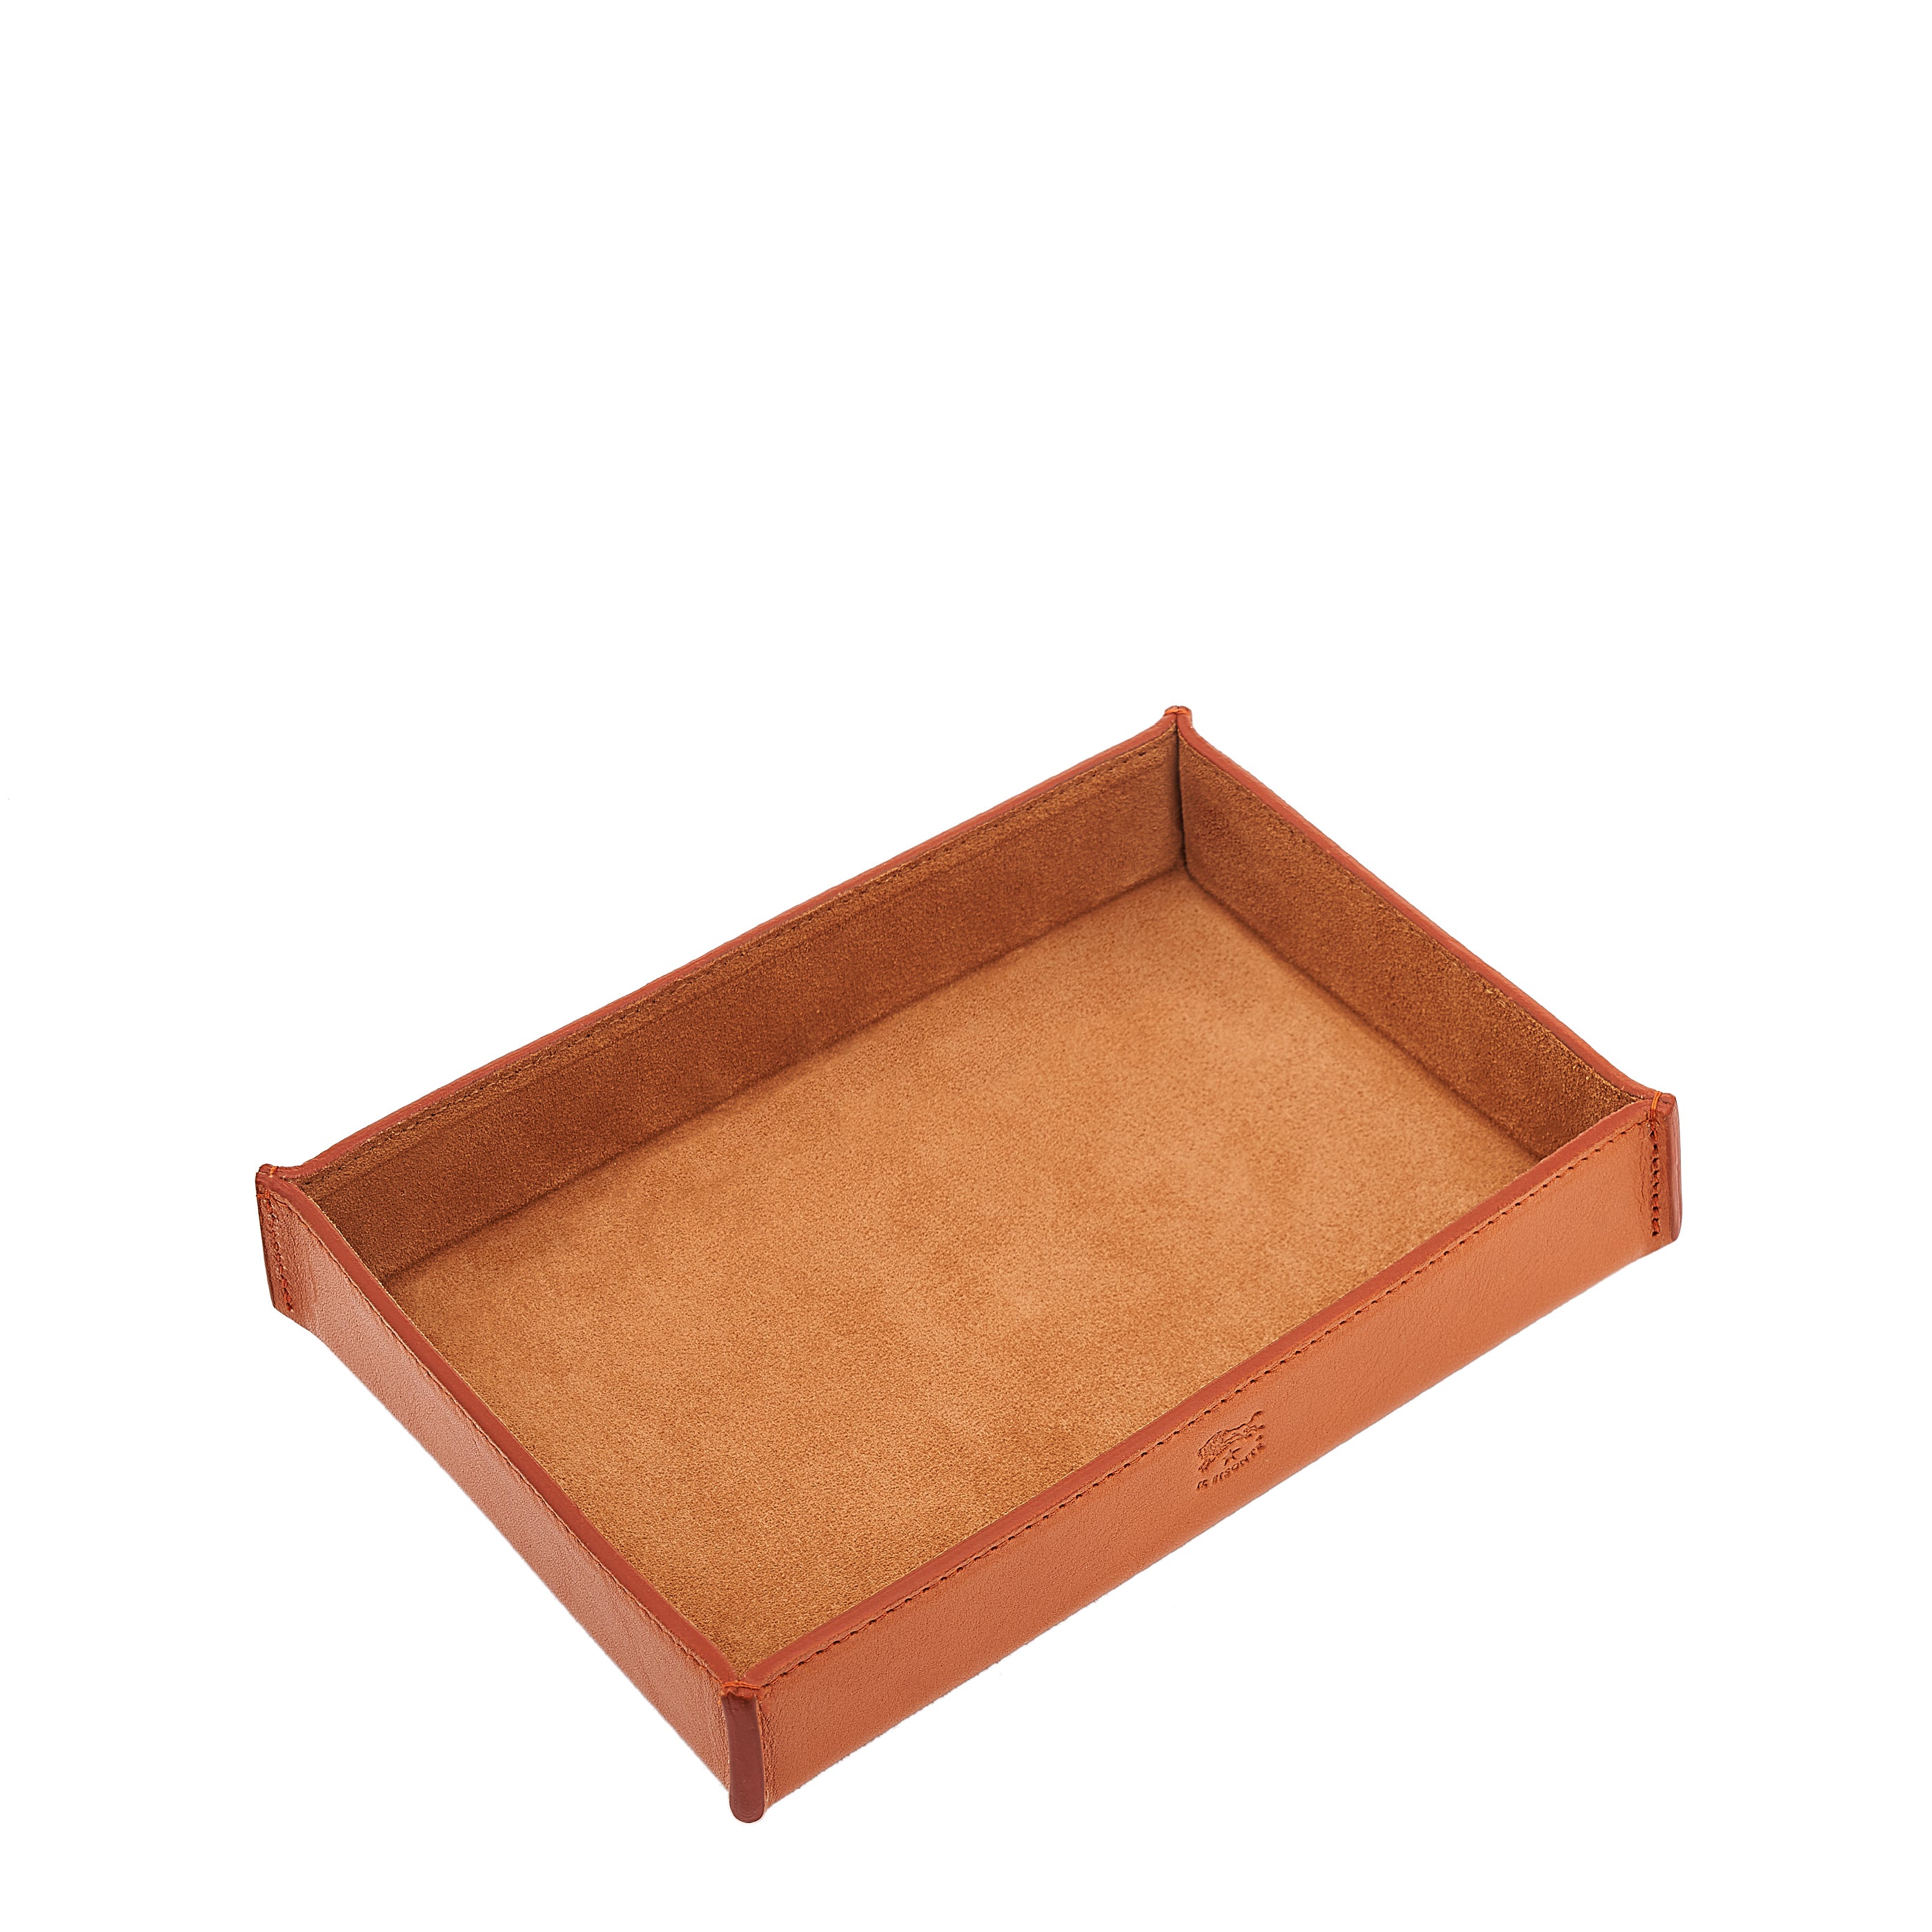 Home | Desk accessory in leather color caramel